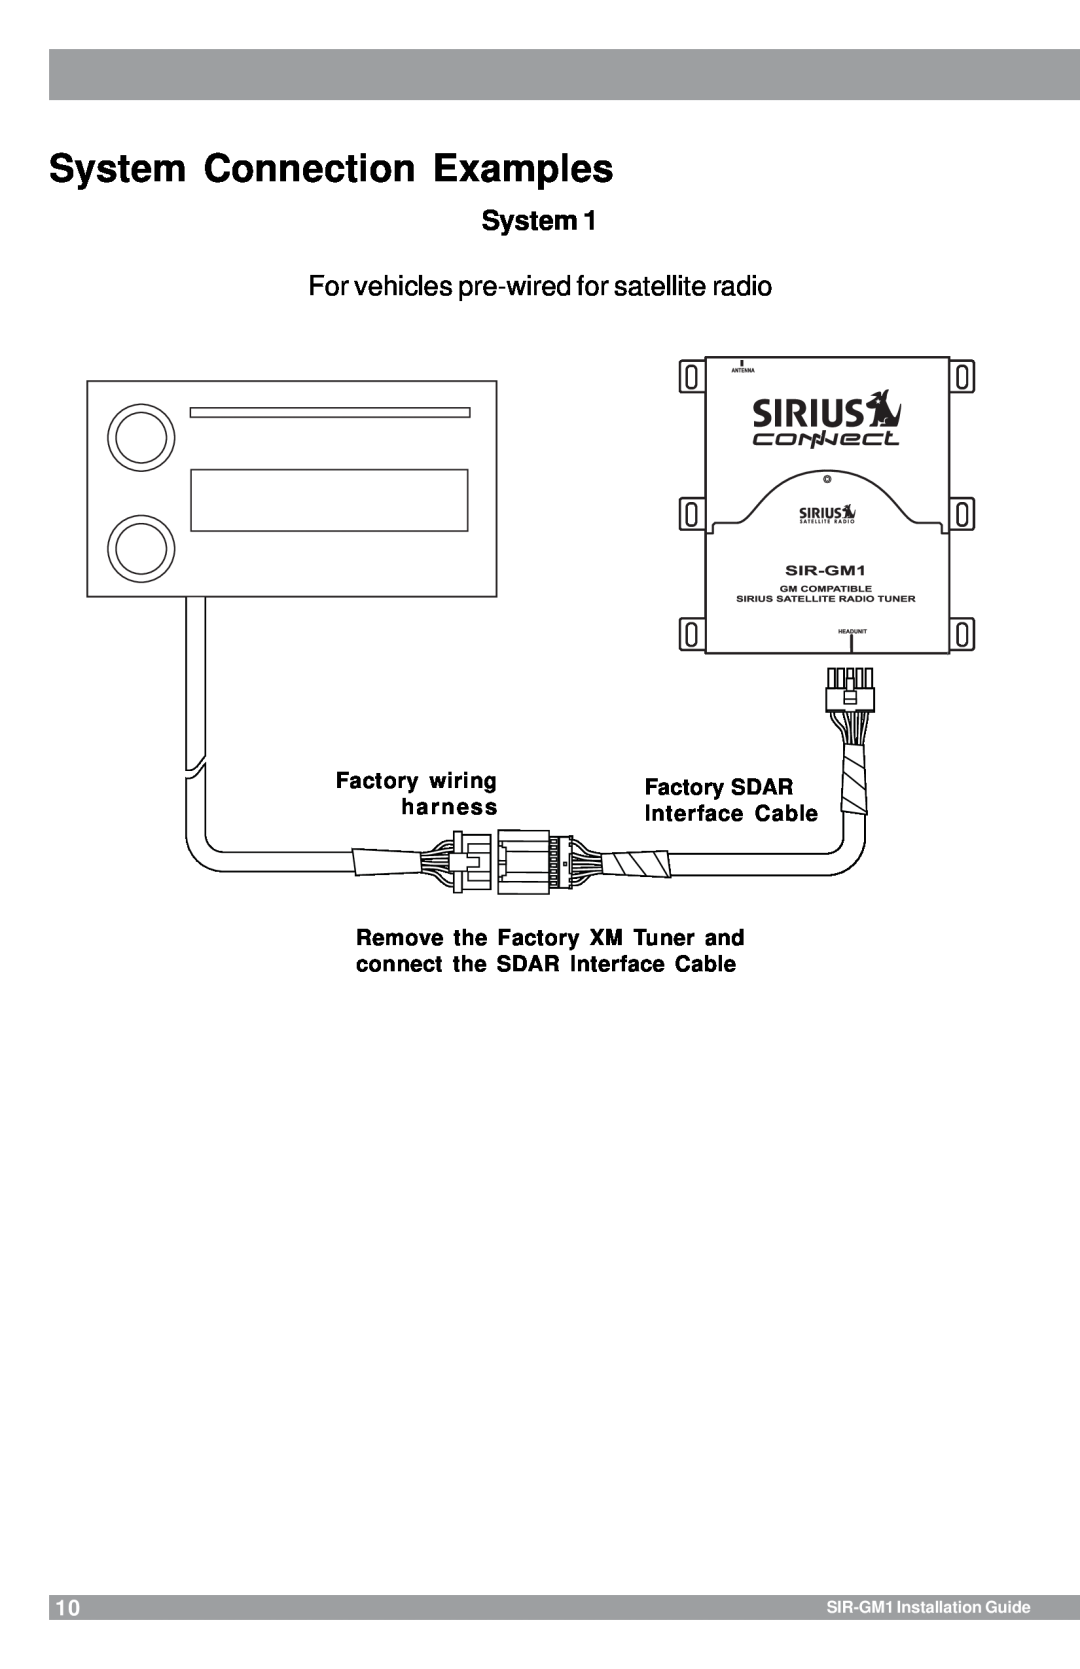 Sirius Satellite Radio SIR-GM1 manual System Connection Examples, Factory wiring, Factory SDAR, harness, Interface Cable 